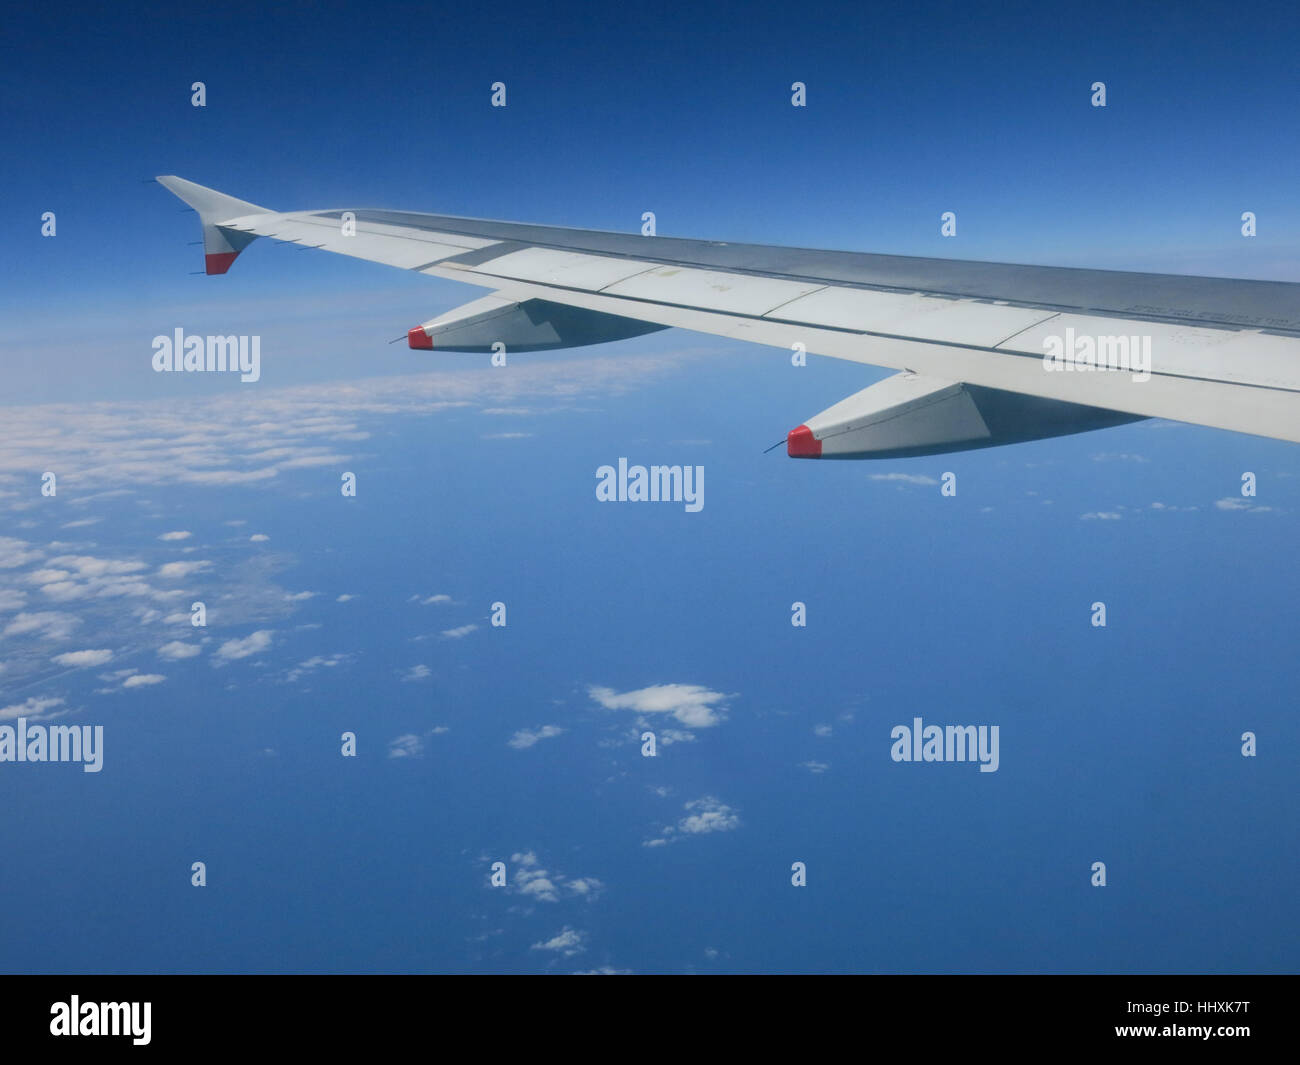 Wing of an aircraft flying over the ocean Stock Photo